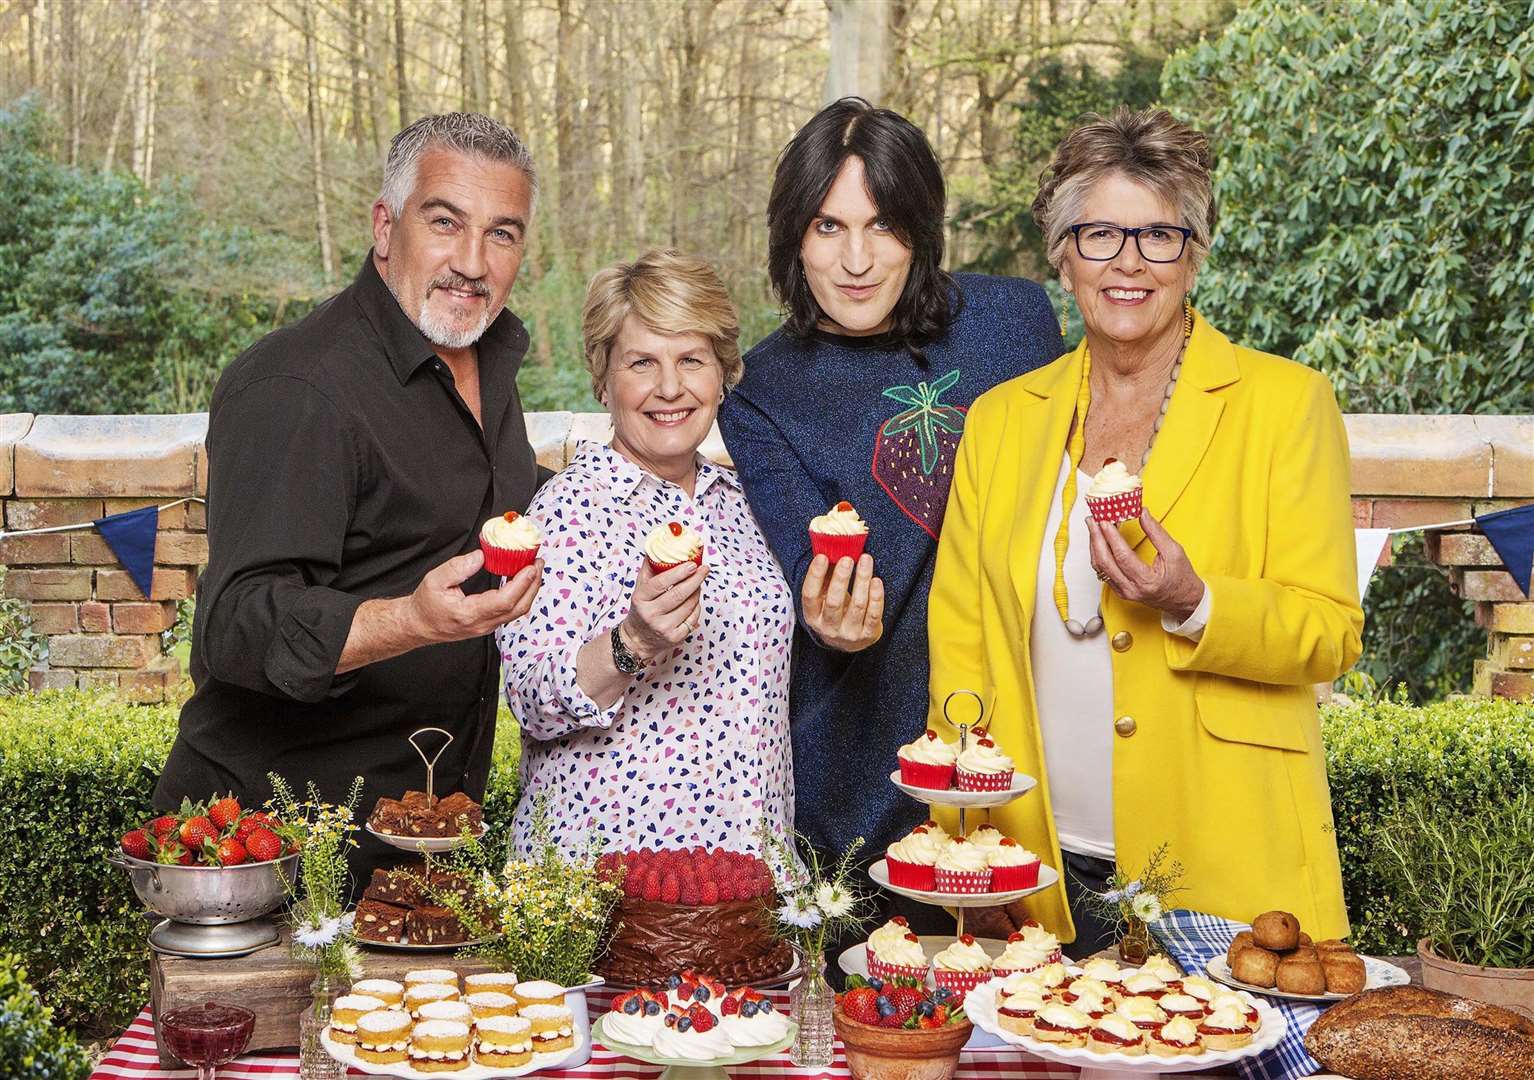 Paul Hollywood with co-stars Sandi Toksvig, Noel Fielding and Prue Leith. Picture: Love Productions / Channel 4 / Mark Bourdillon